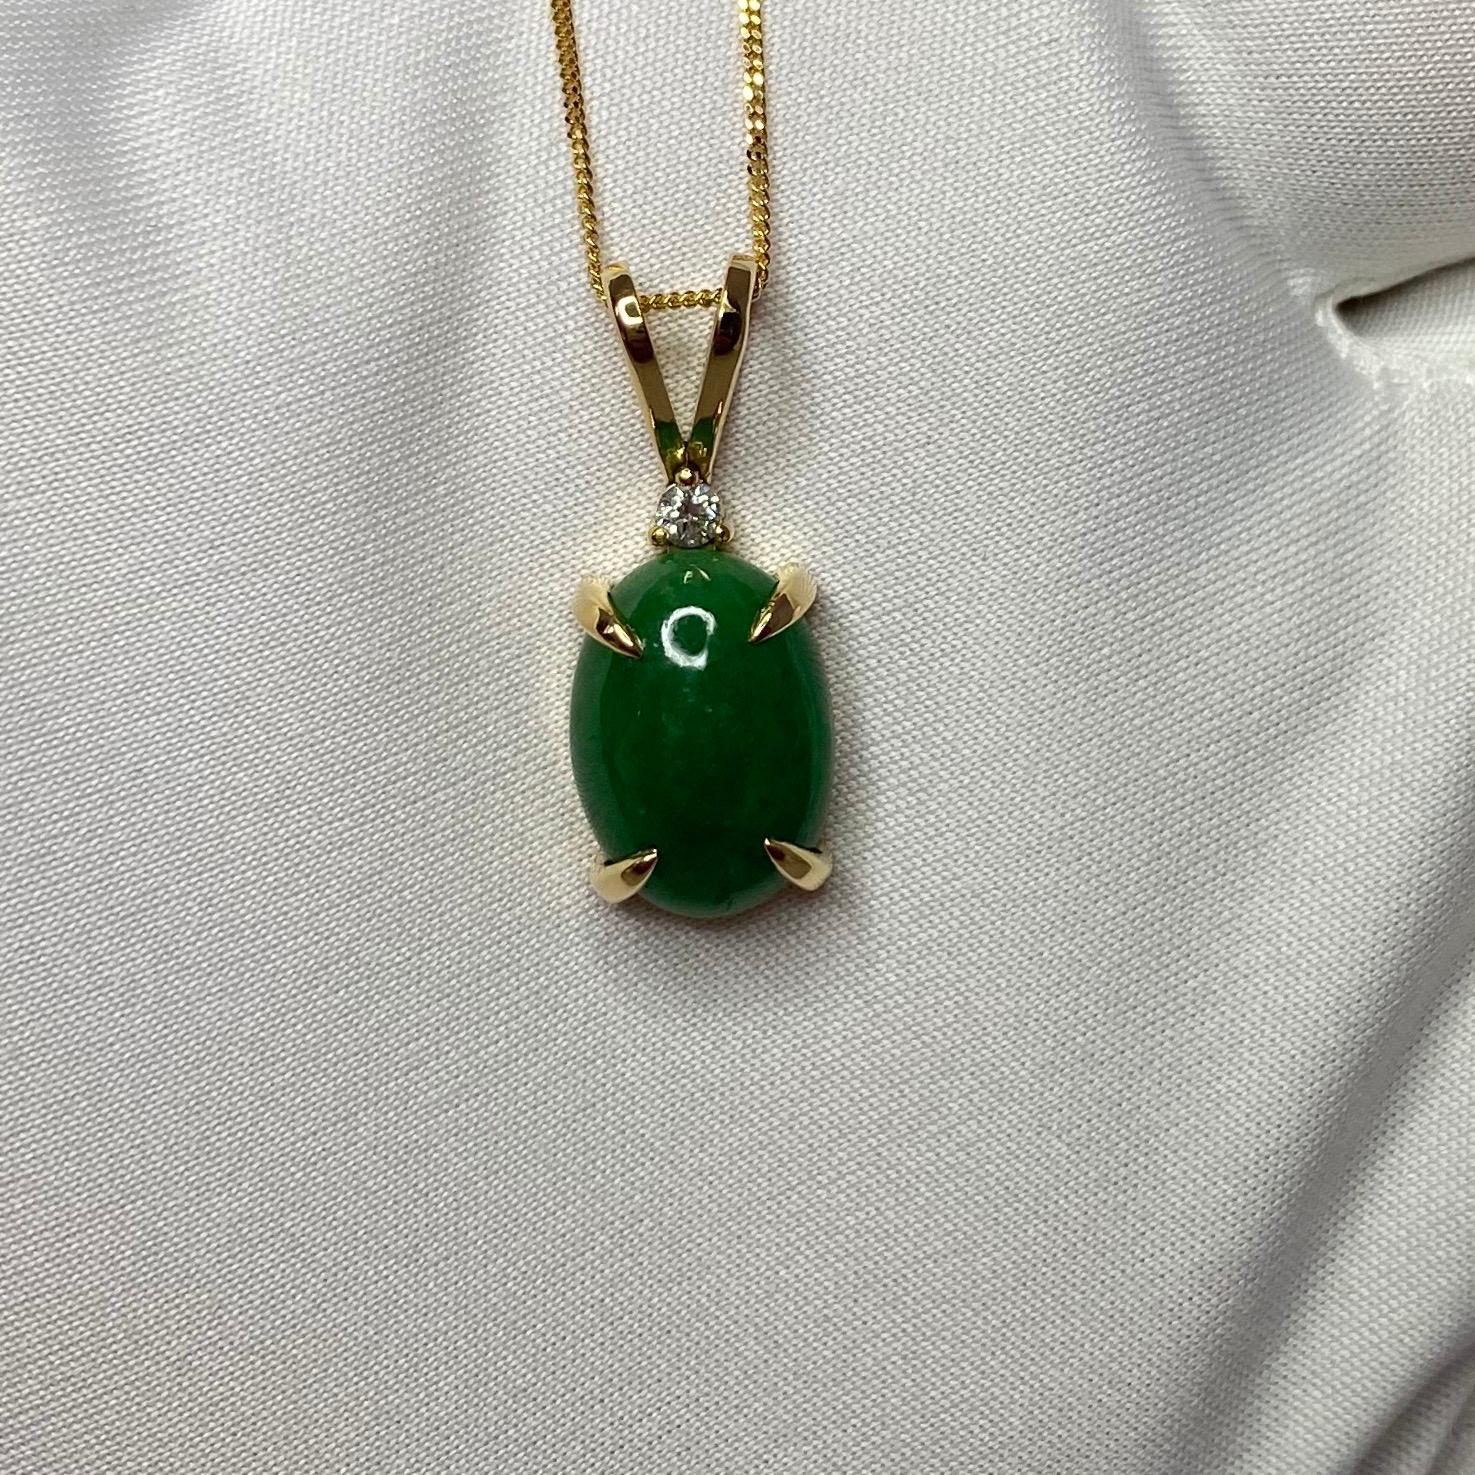 x2 GIA Certified Jadeite 18k Pendants Custom Listing As in messages - No Chains 2